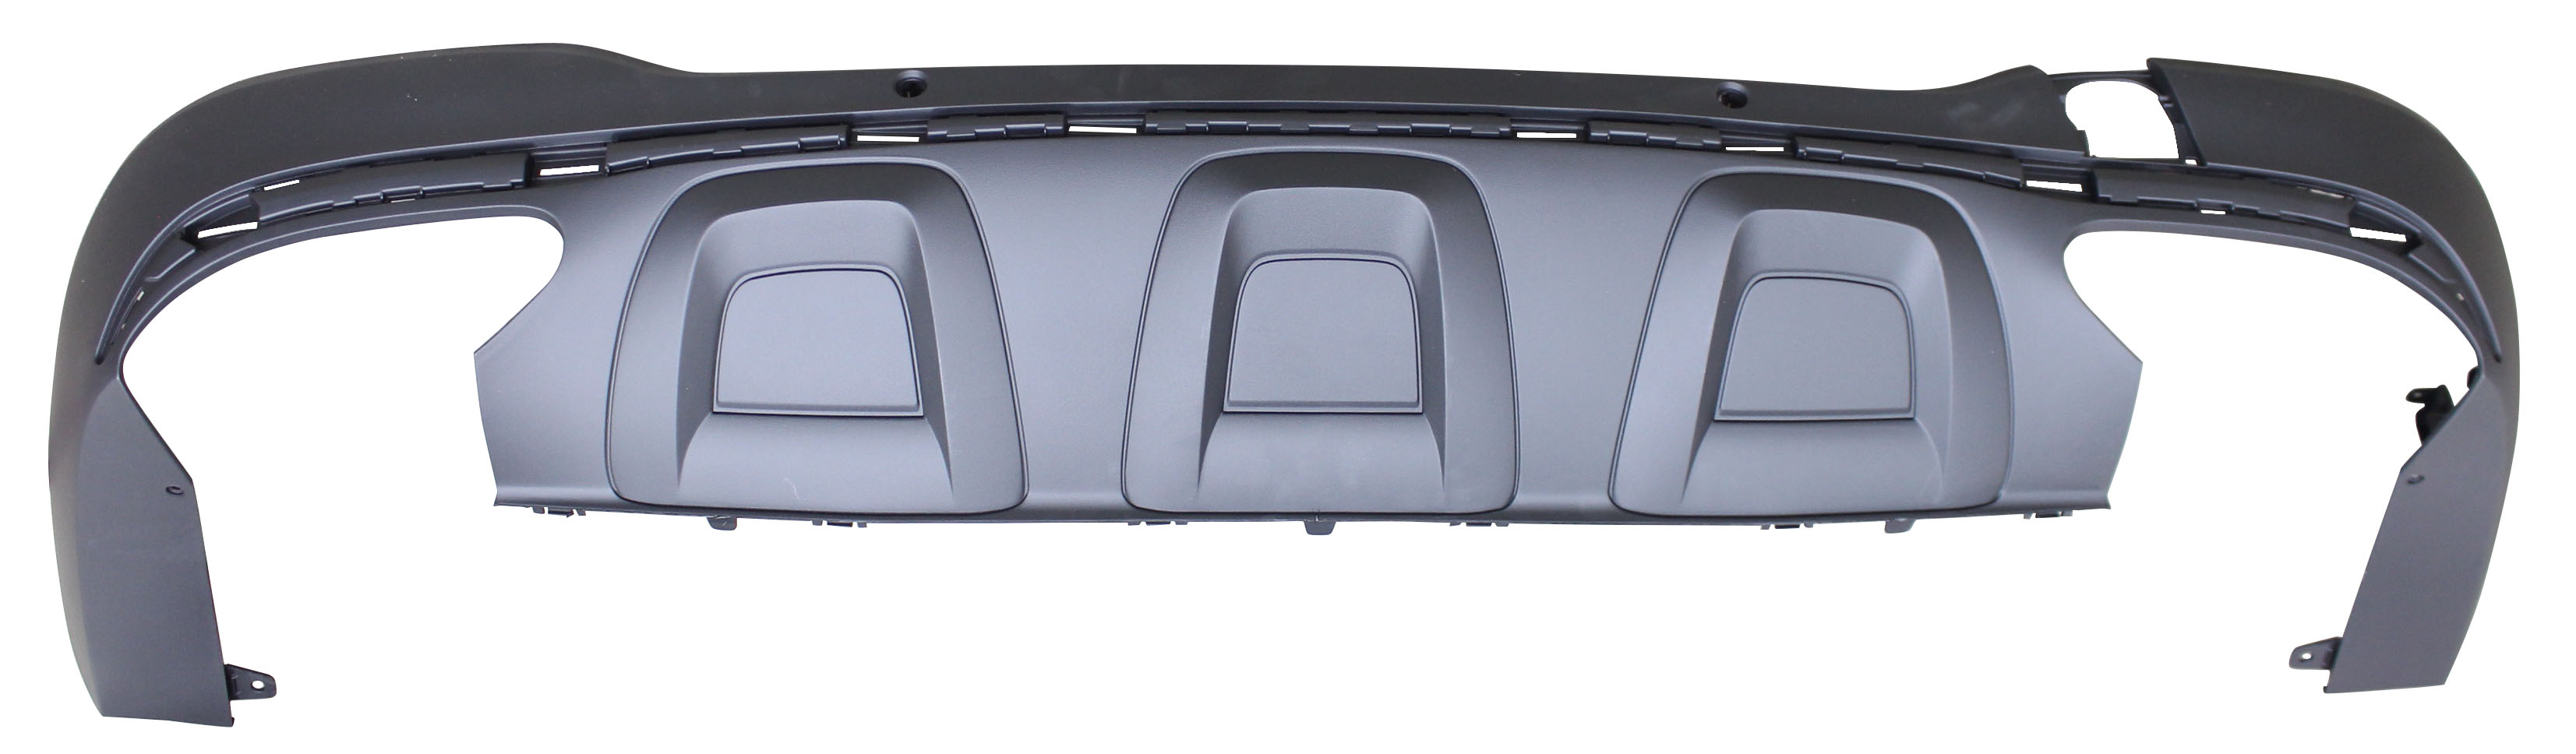 Aftermarket BUMPER COVERS for MERCEDES-BENZ - GLC43 AMG, GLC43 AMG,17-19,Rear bumper cover lower